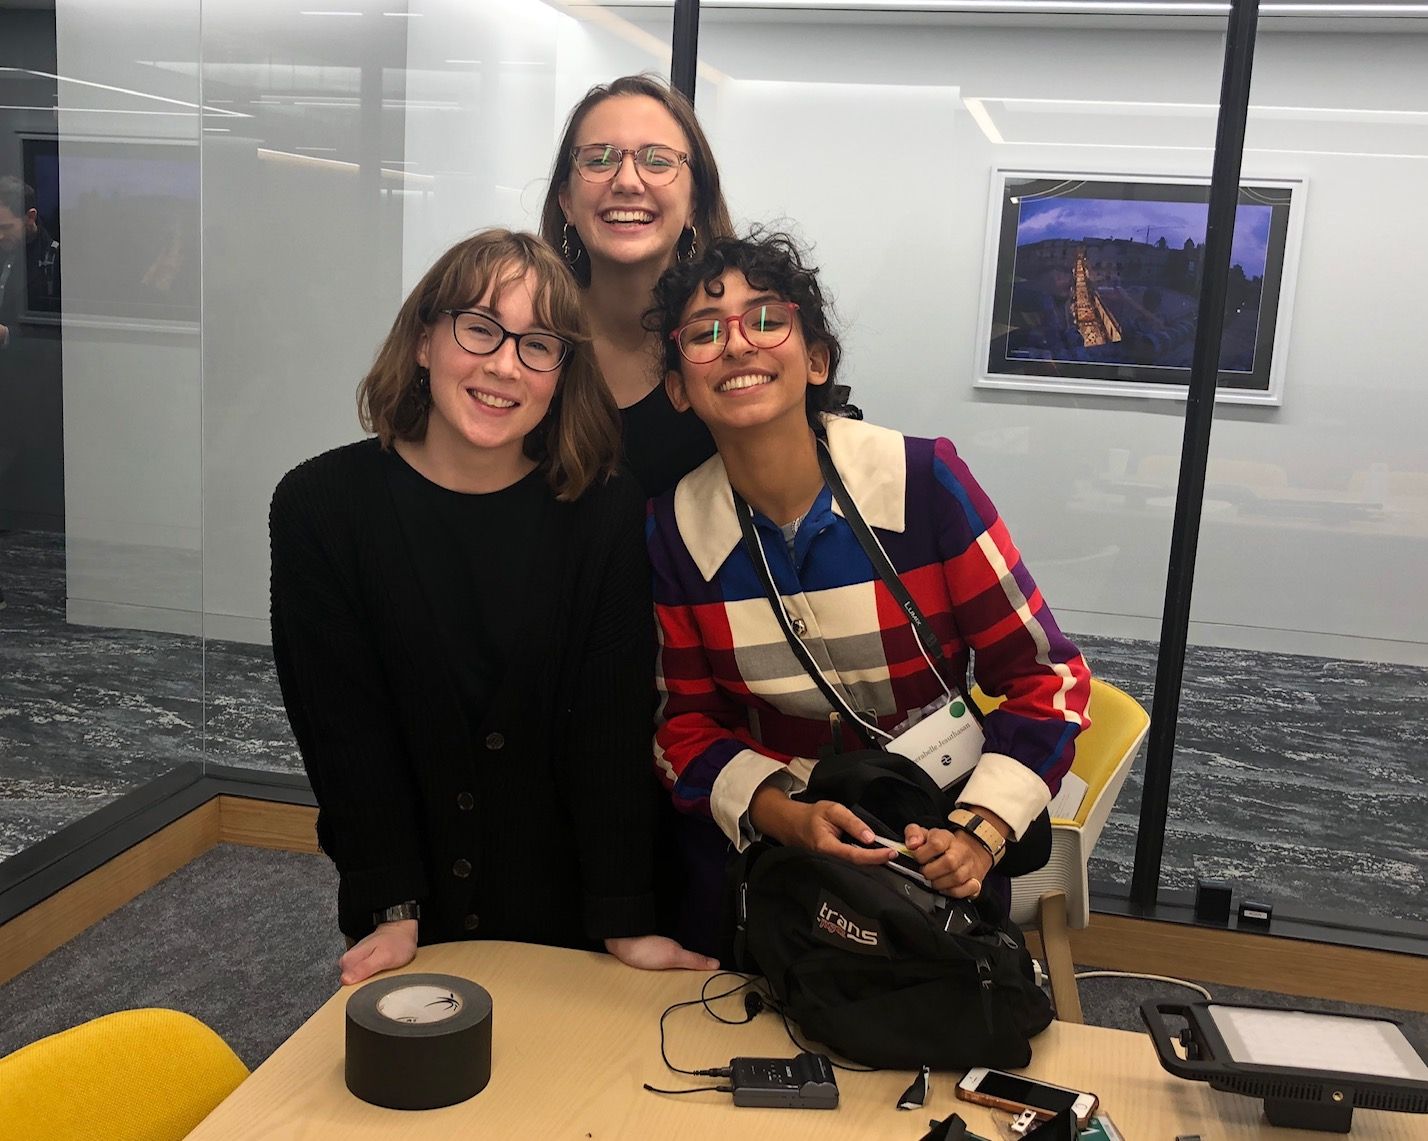 General intern Libby Moeller, multimedia coordinator Claire Seaton, and education intern Meerabelle Jesuthasan at the end of Washington Weekend. Image by Kem Sawyer. United States, 2019.